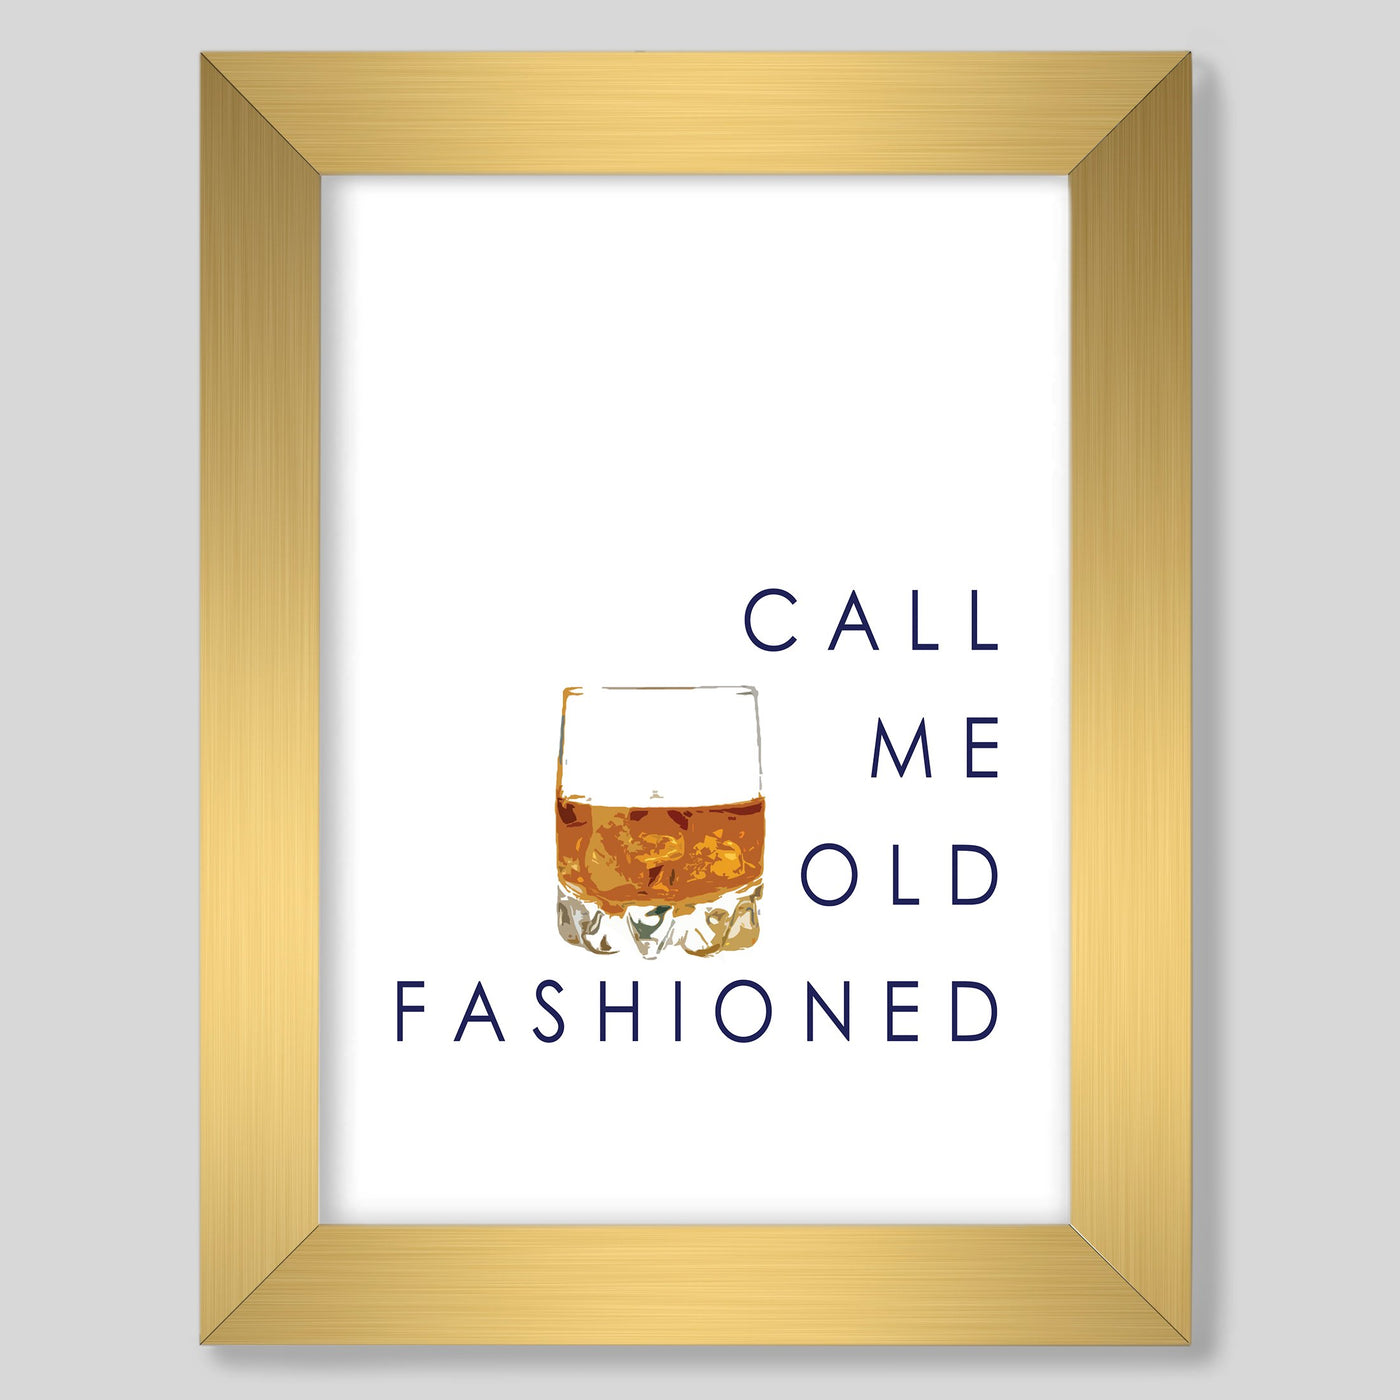 Gallery Prints 8x10 / gold frame Call Me Old Fashioned Print dombezalergii